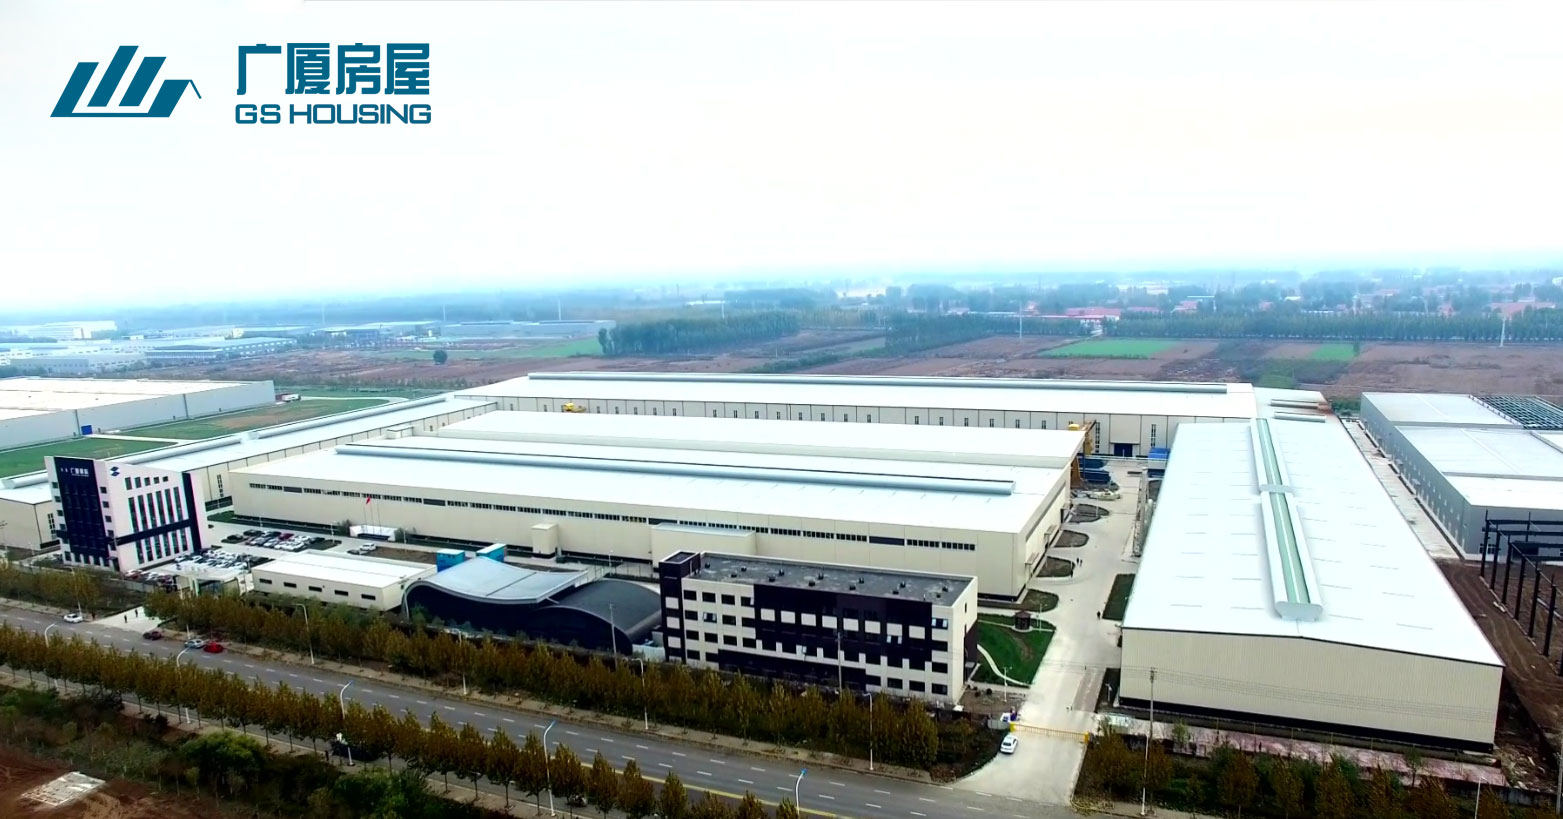 https://www.gshousinggroup.com/videos/gs-housing-tianjin-production-base-in-north-of-china-top-3-biggest-modular-house-factory-of-china/